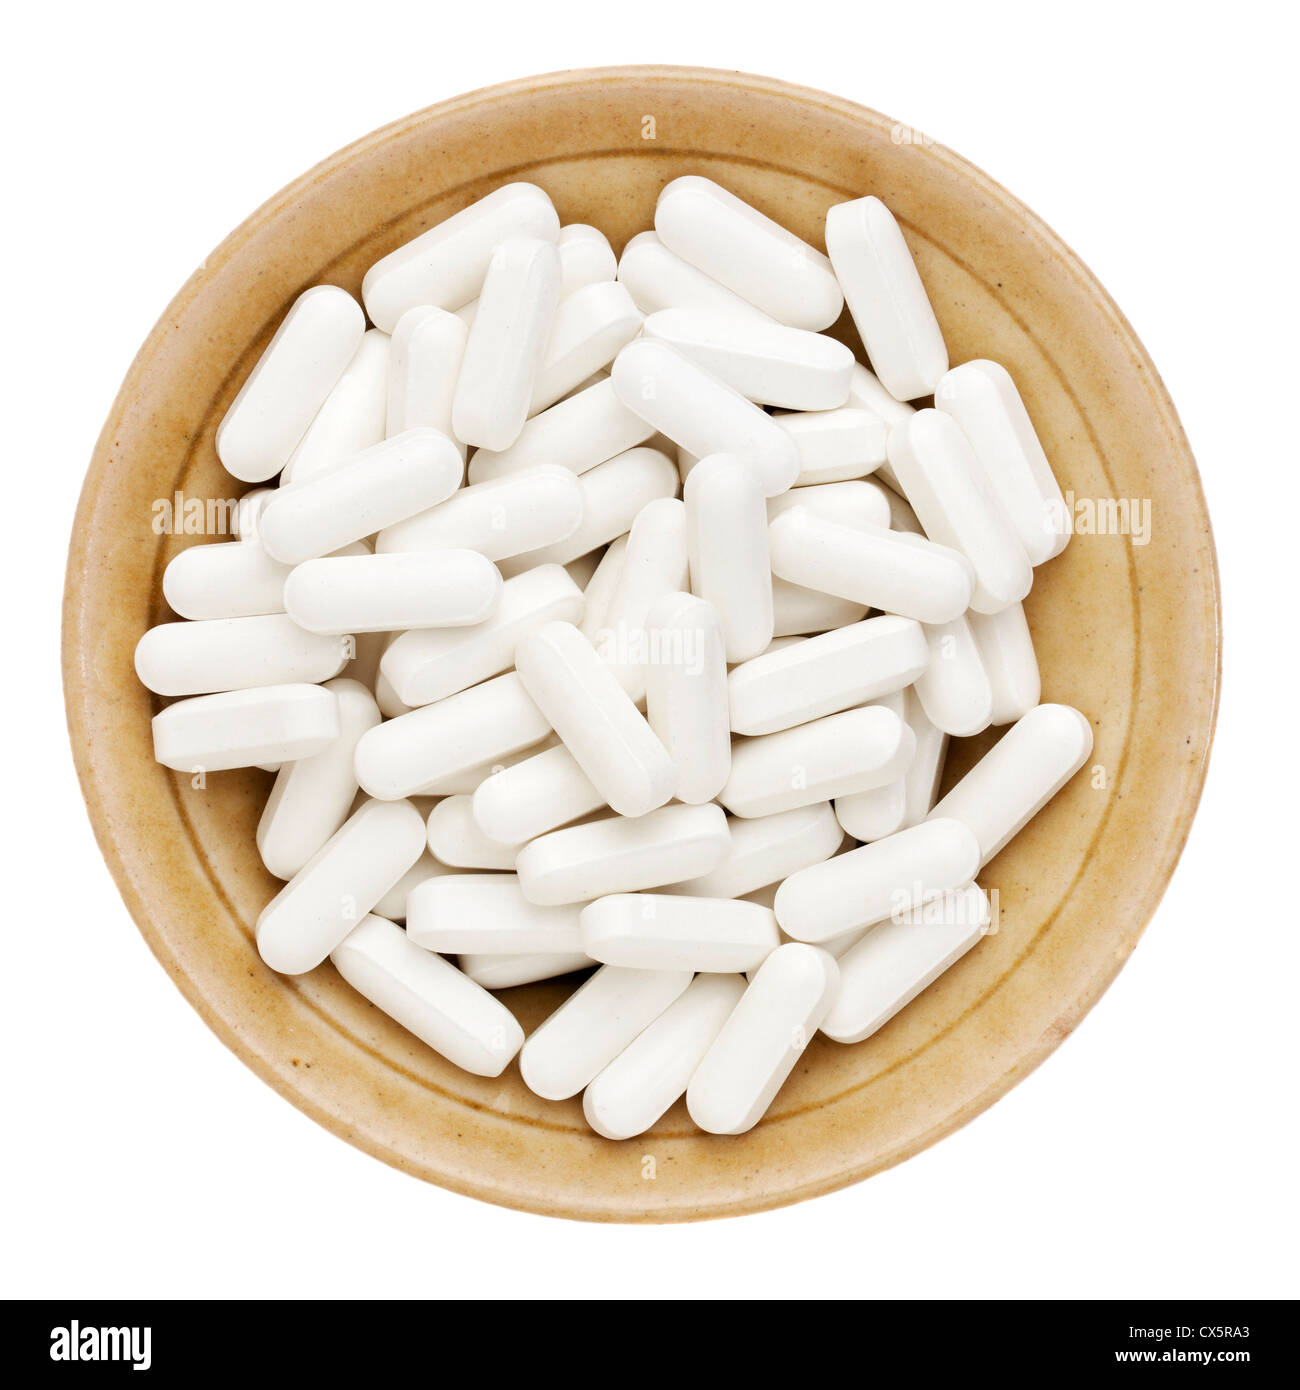 white vitamin, supplement or drug pills in a small ceramic bowl Stock Photo